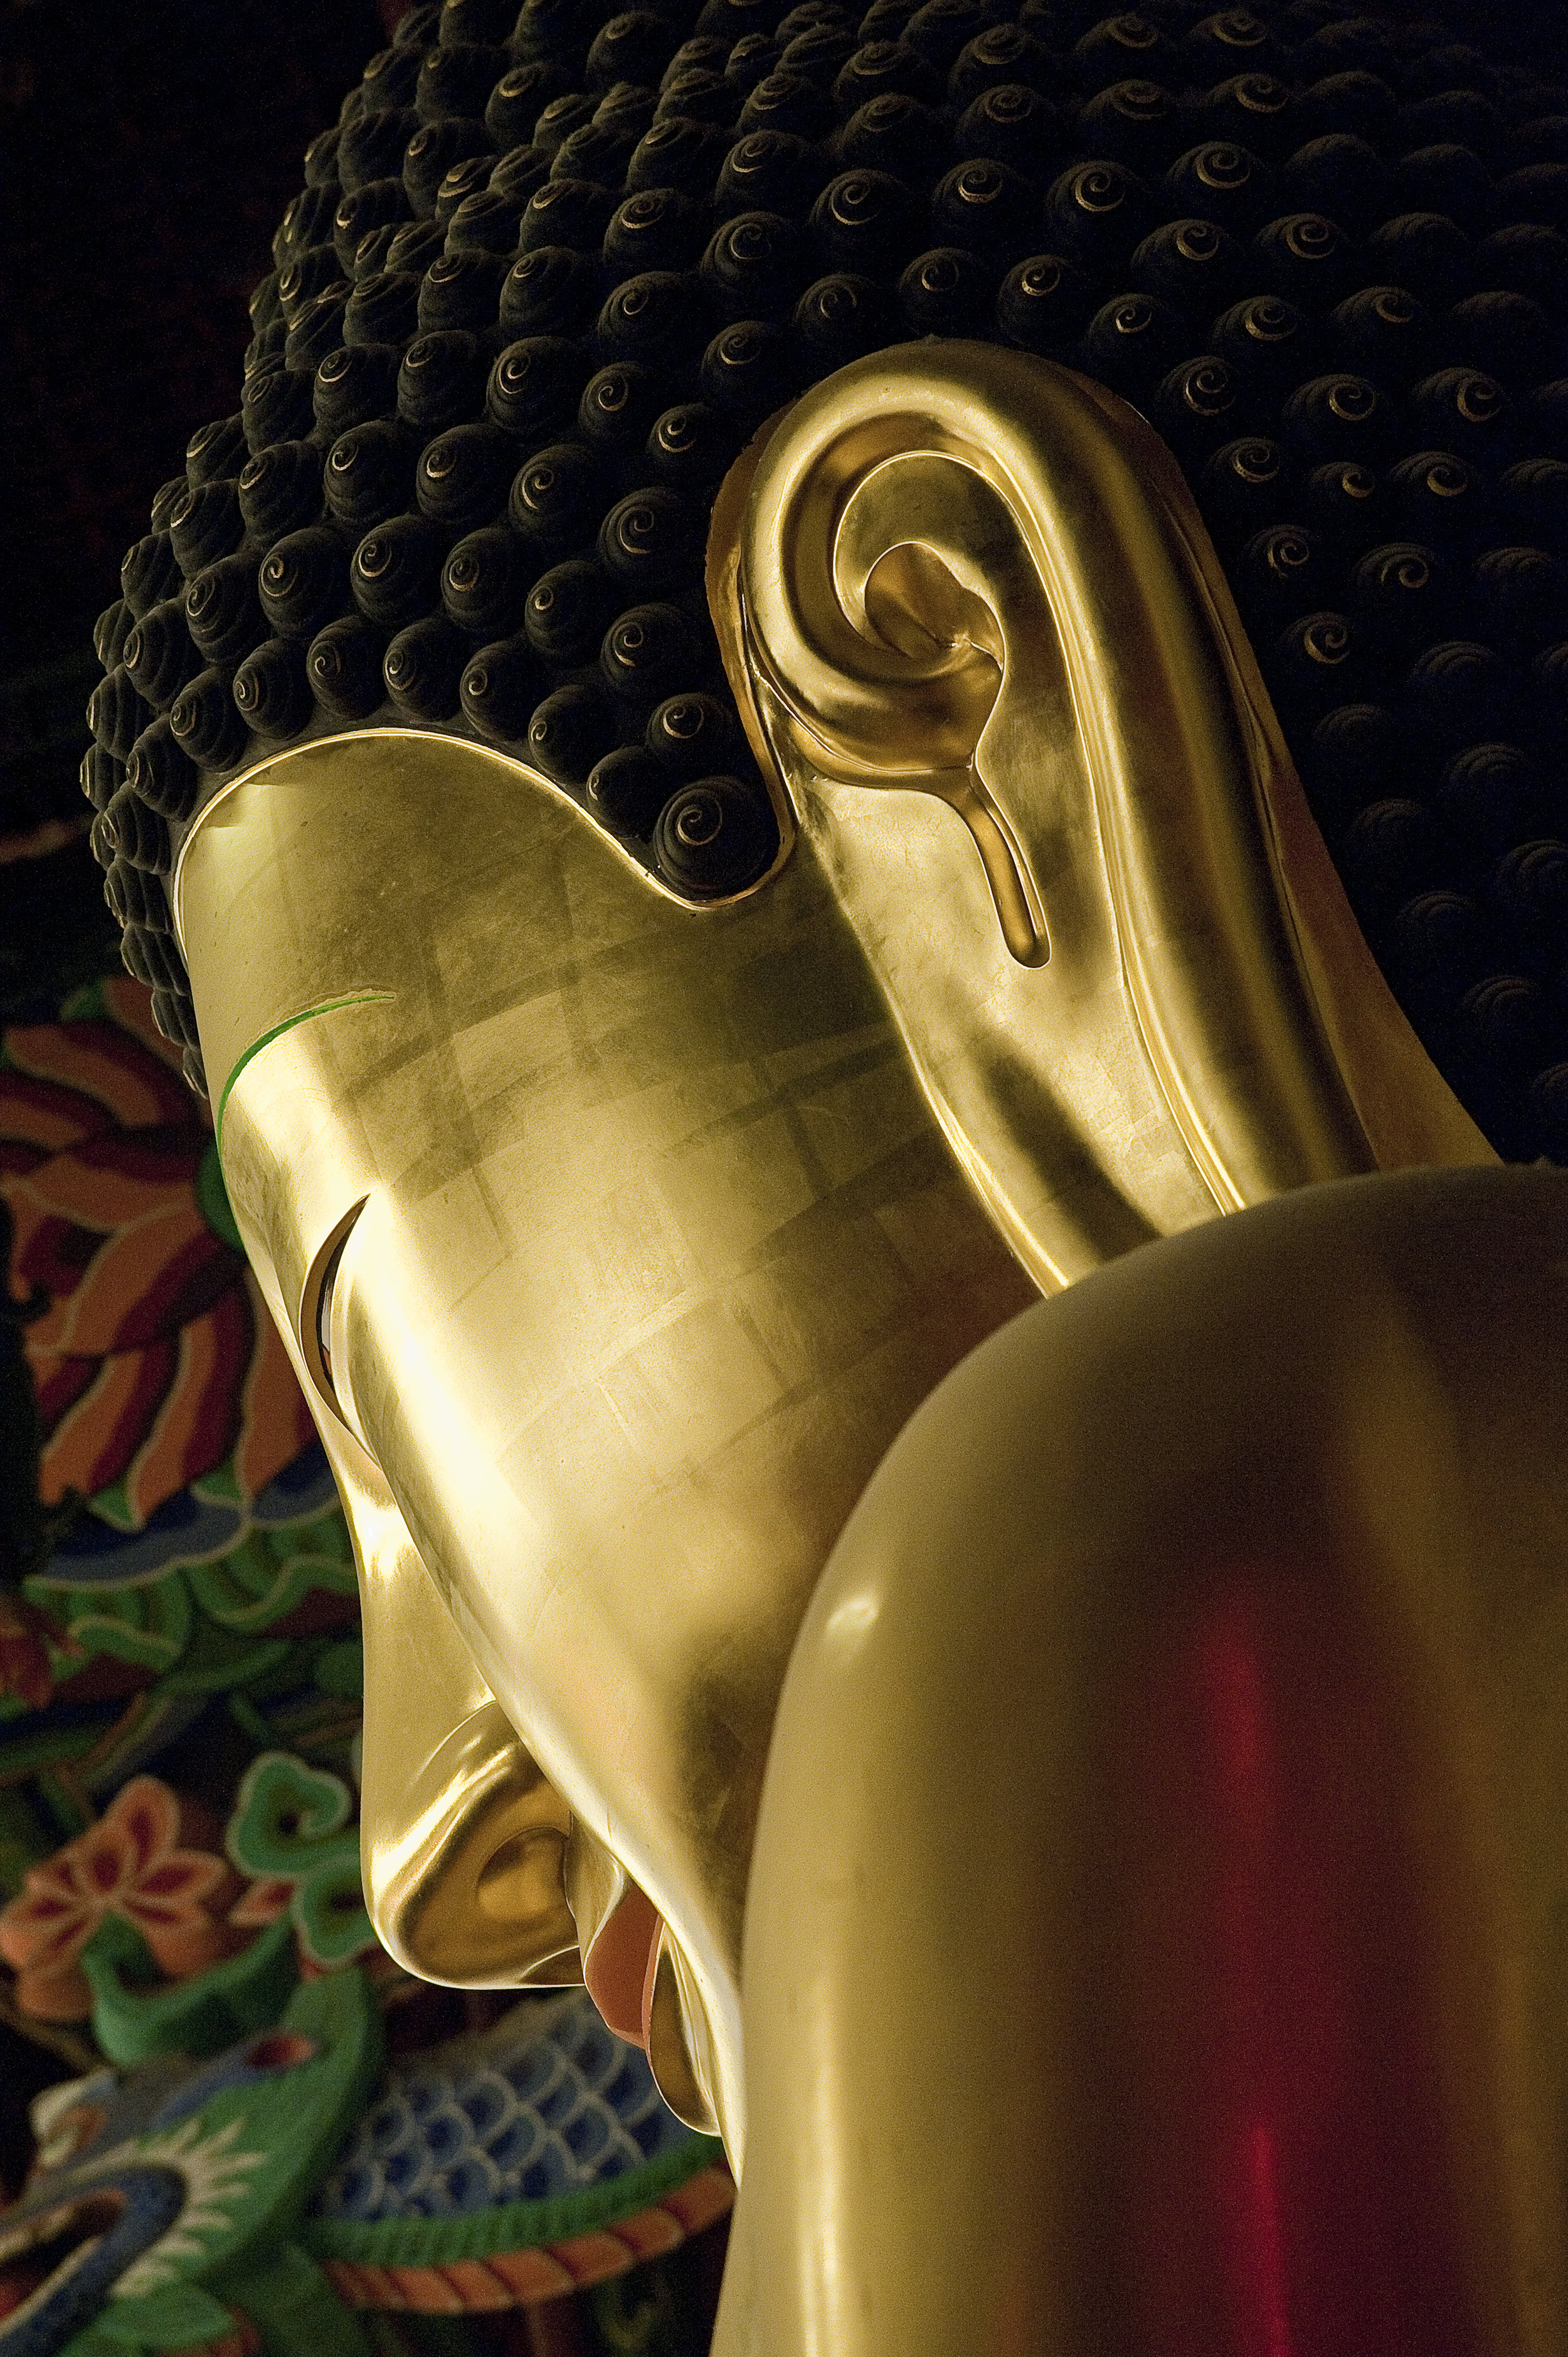 Golden Buddha Statue inside Jogyesa Temple in Seoul South Korea for National Geographic